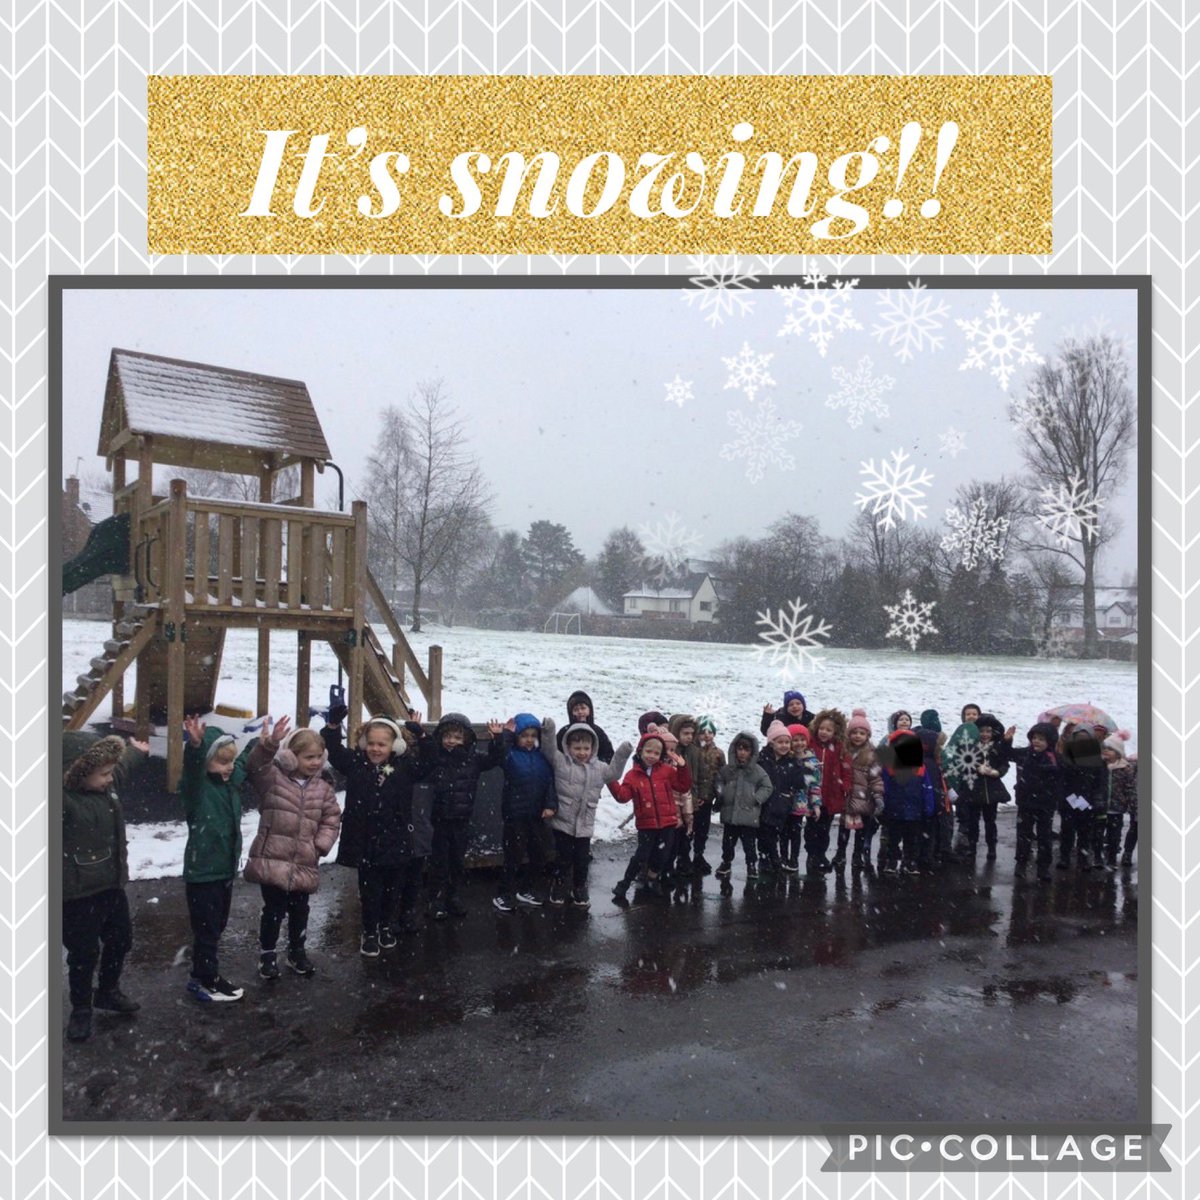 ❄️ When it snows in March, there is only one option but to stop what you are doing and have fun in the snow! ❄️ #makingmemories #snowfun #friends